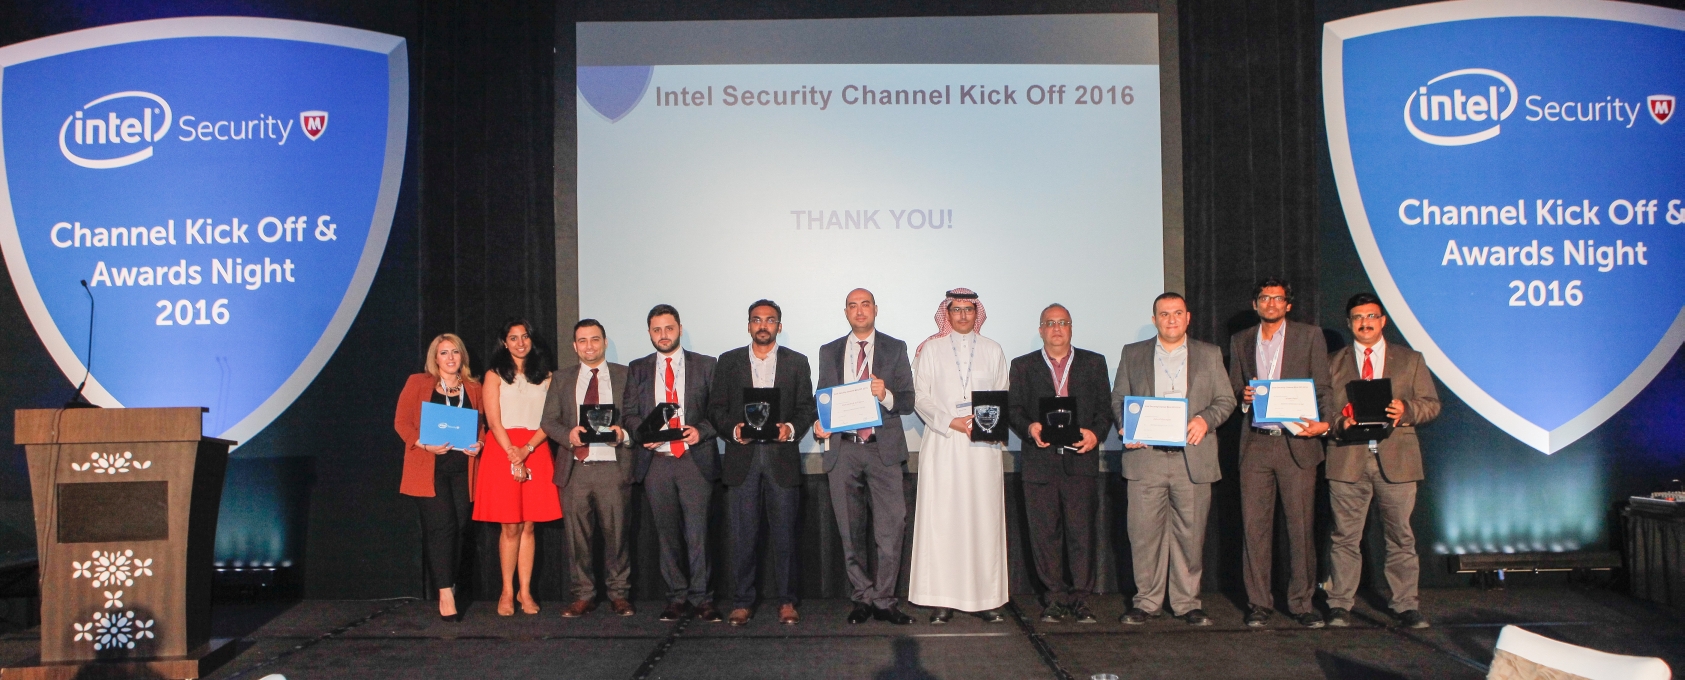 Intel Security recognises outstanding partners at Channel kick-off gala